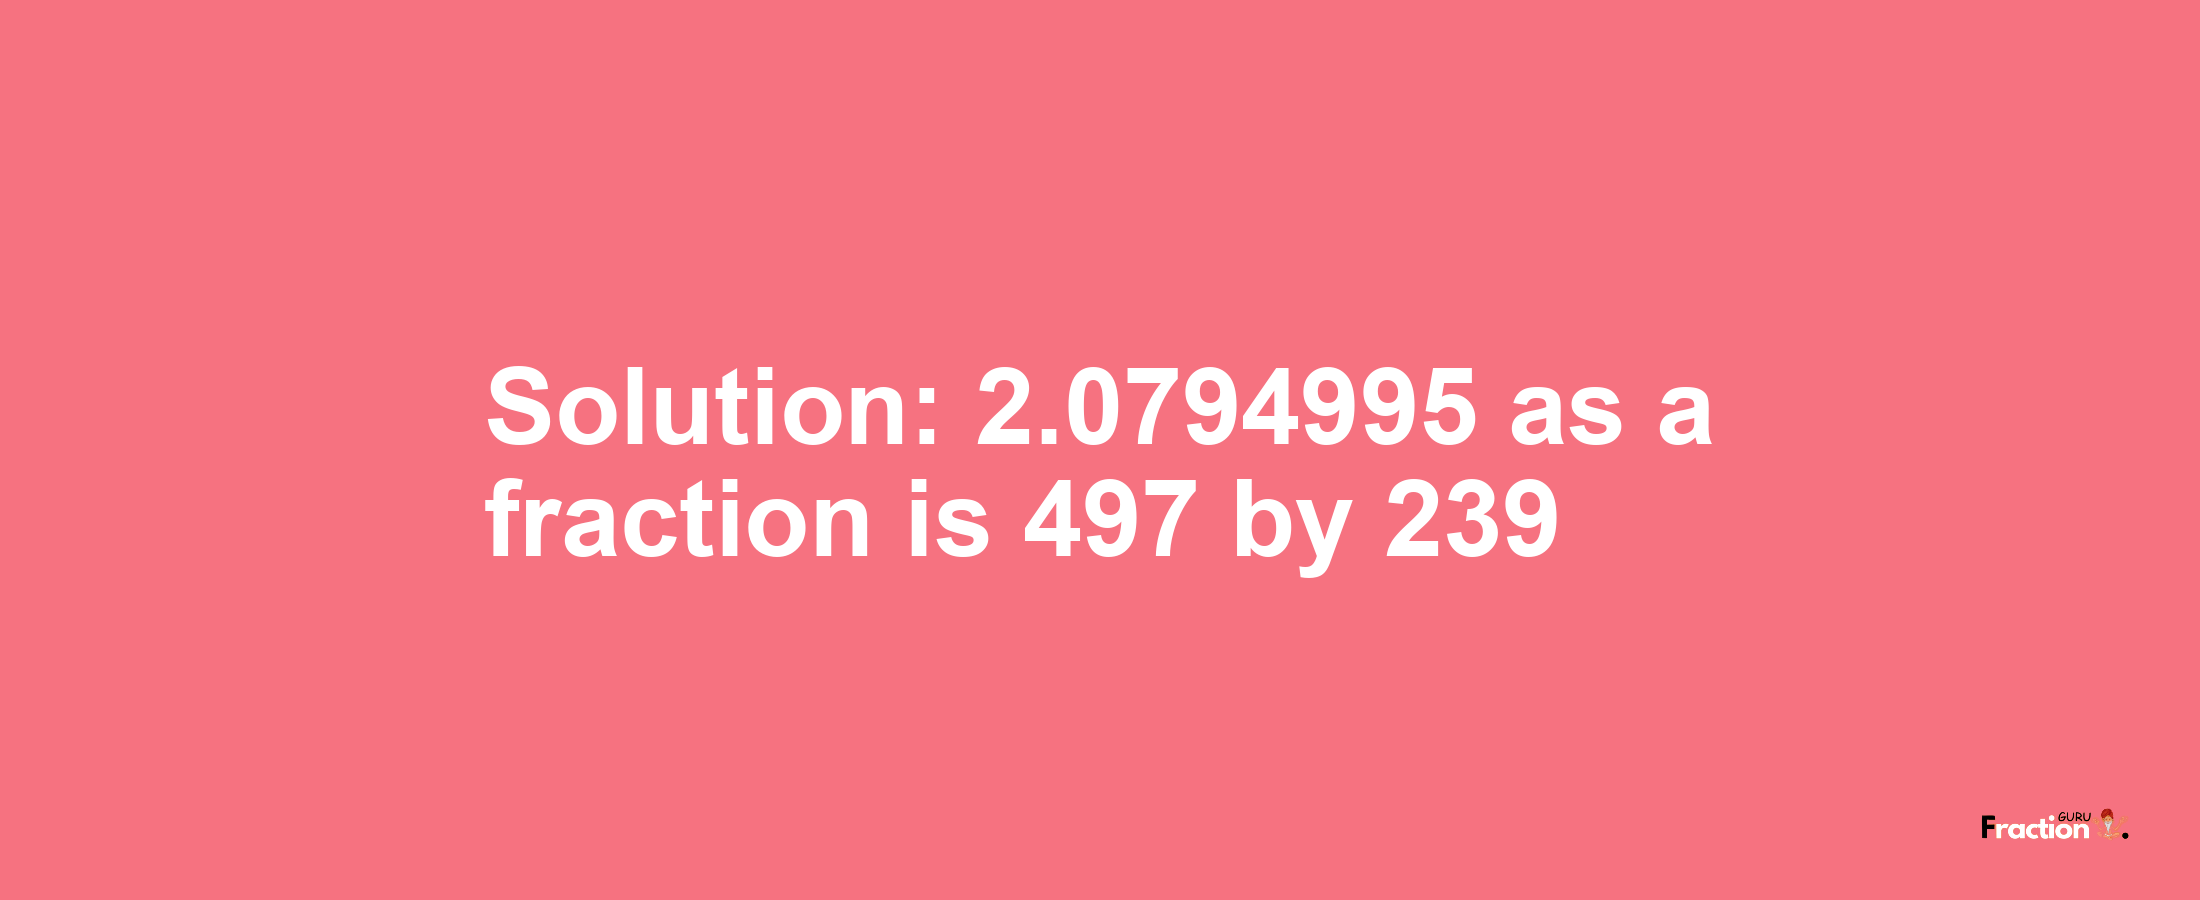 Solution:2.0794995 as a fraction is 497/239